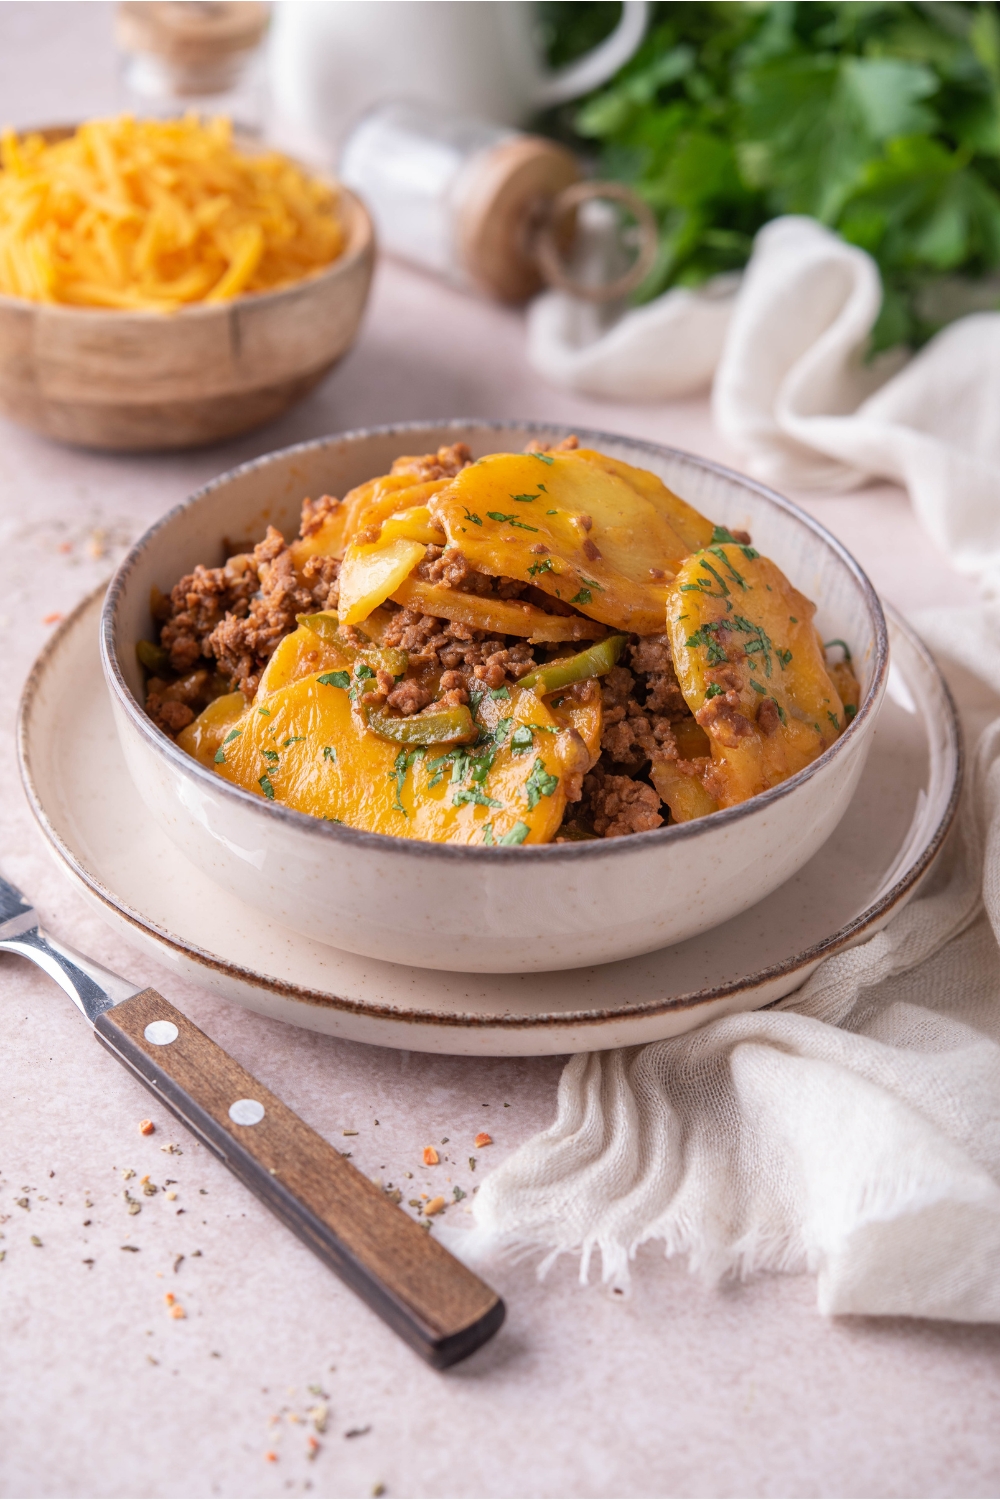 A bowl of thinly sliced potatoes with ground beef, peppers, melted cheese, and fresh herbs.